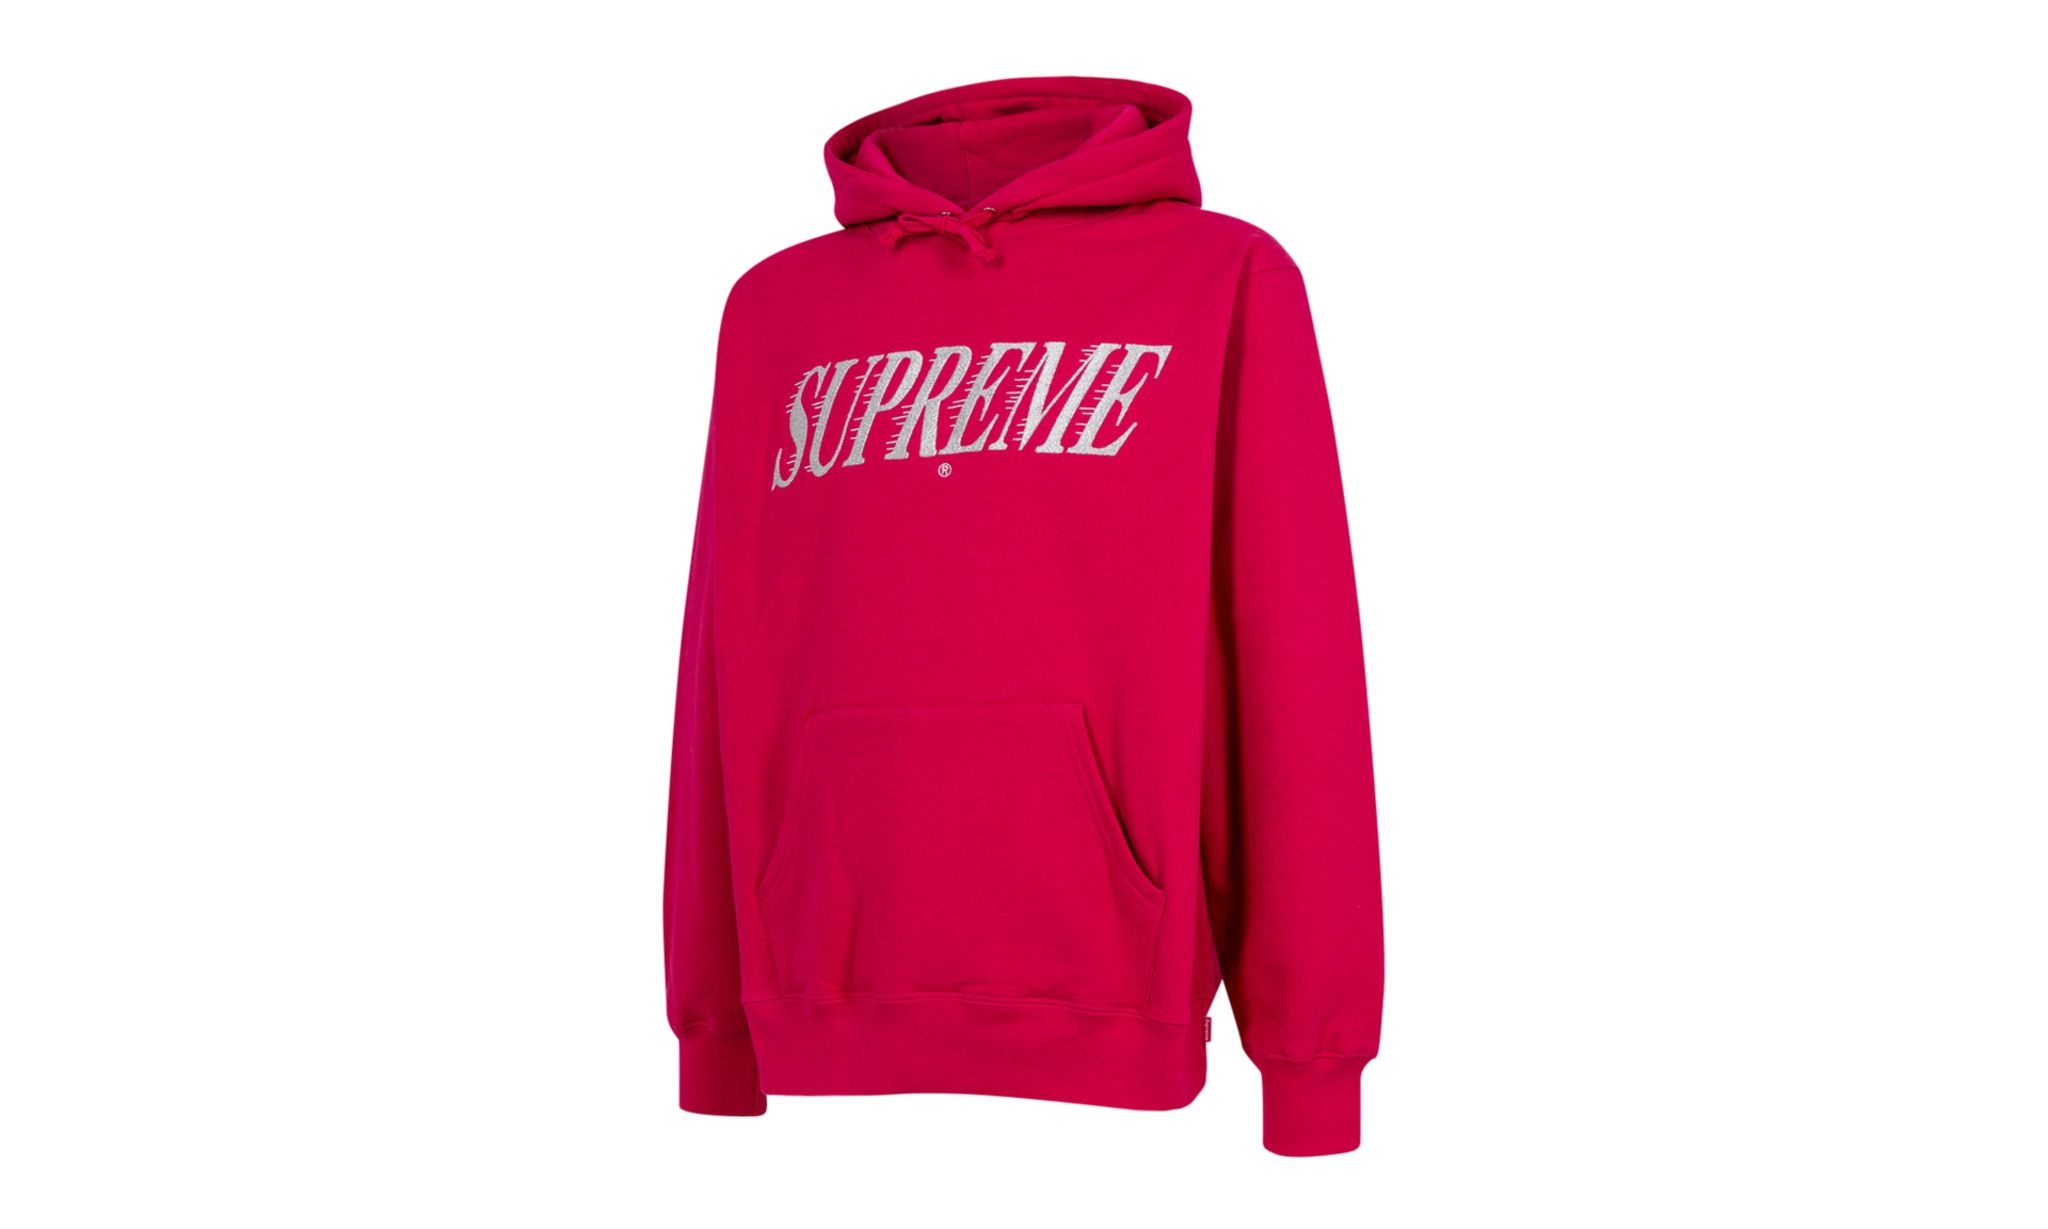 Crossover Hoodie "SS 20" - 2